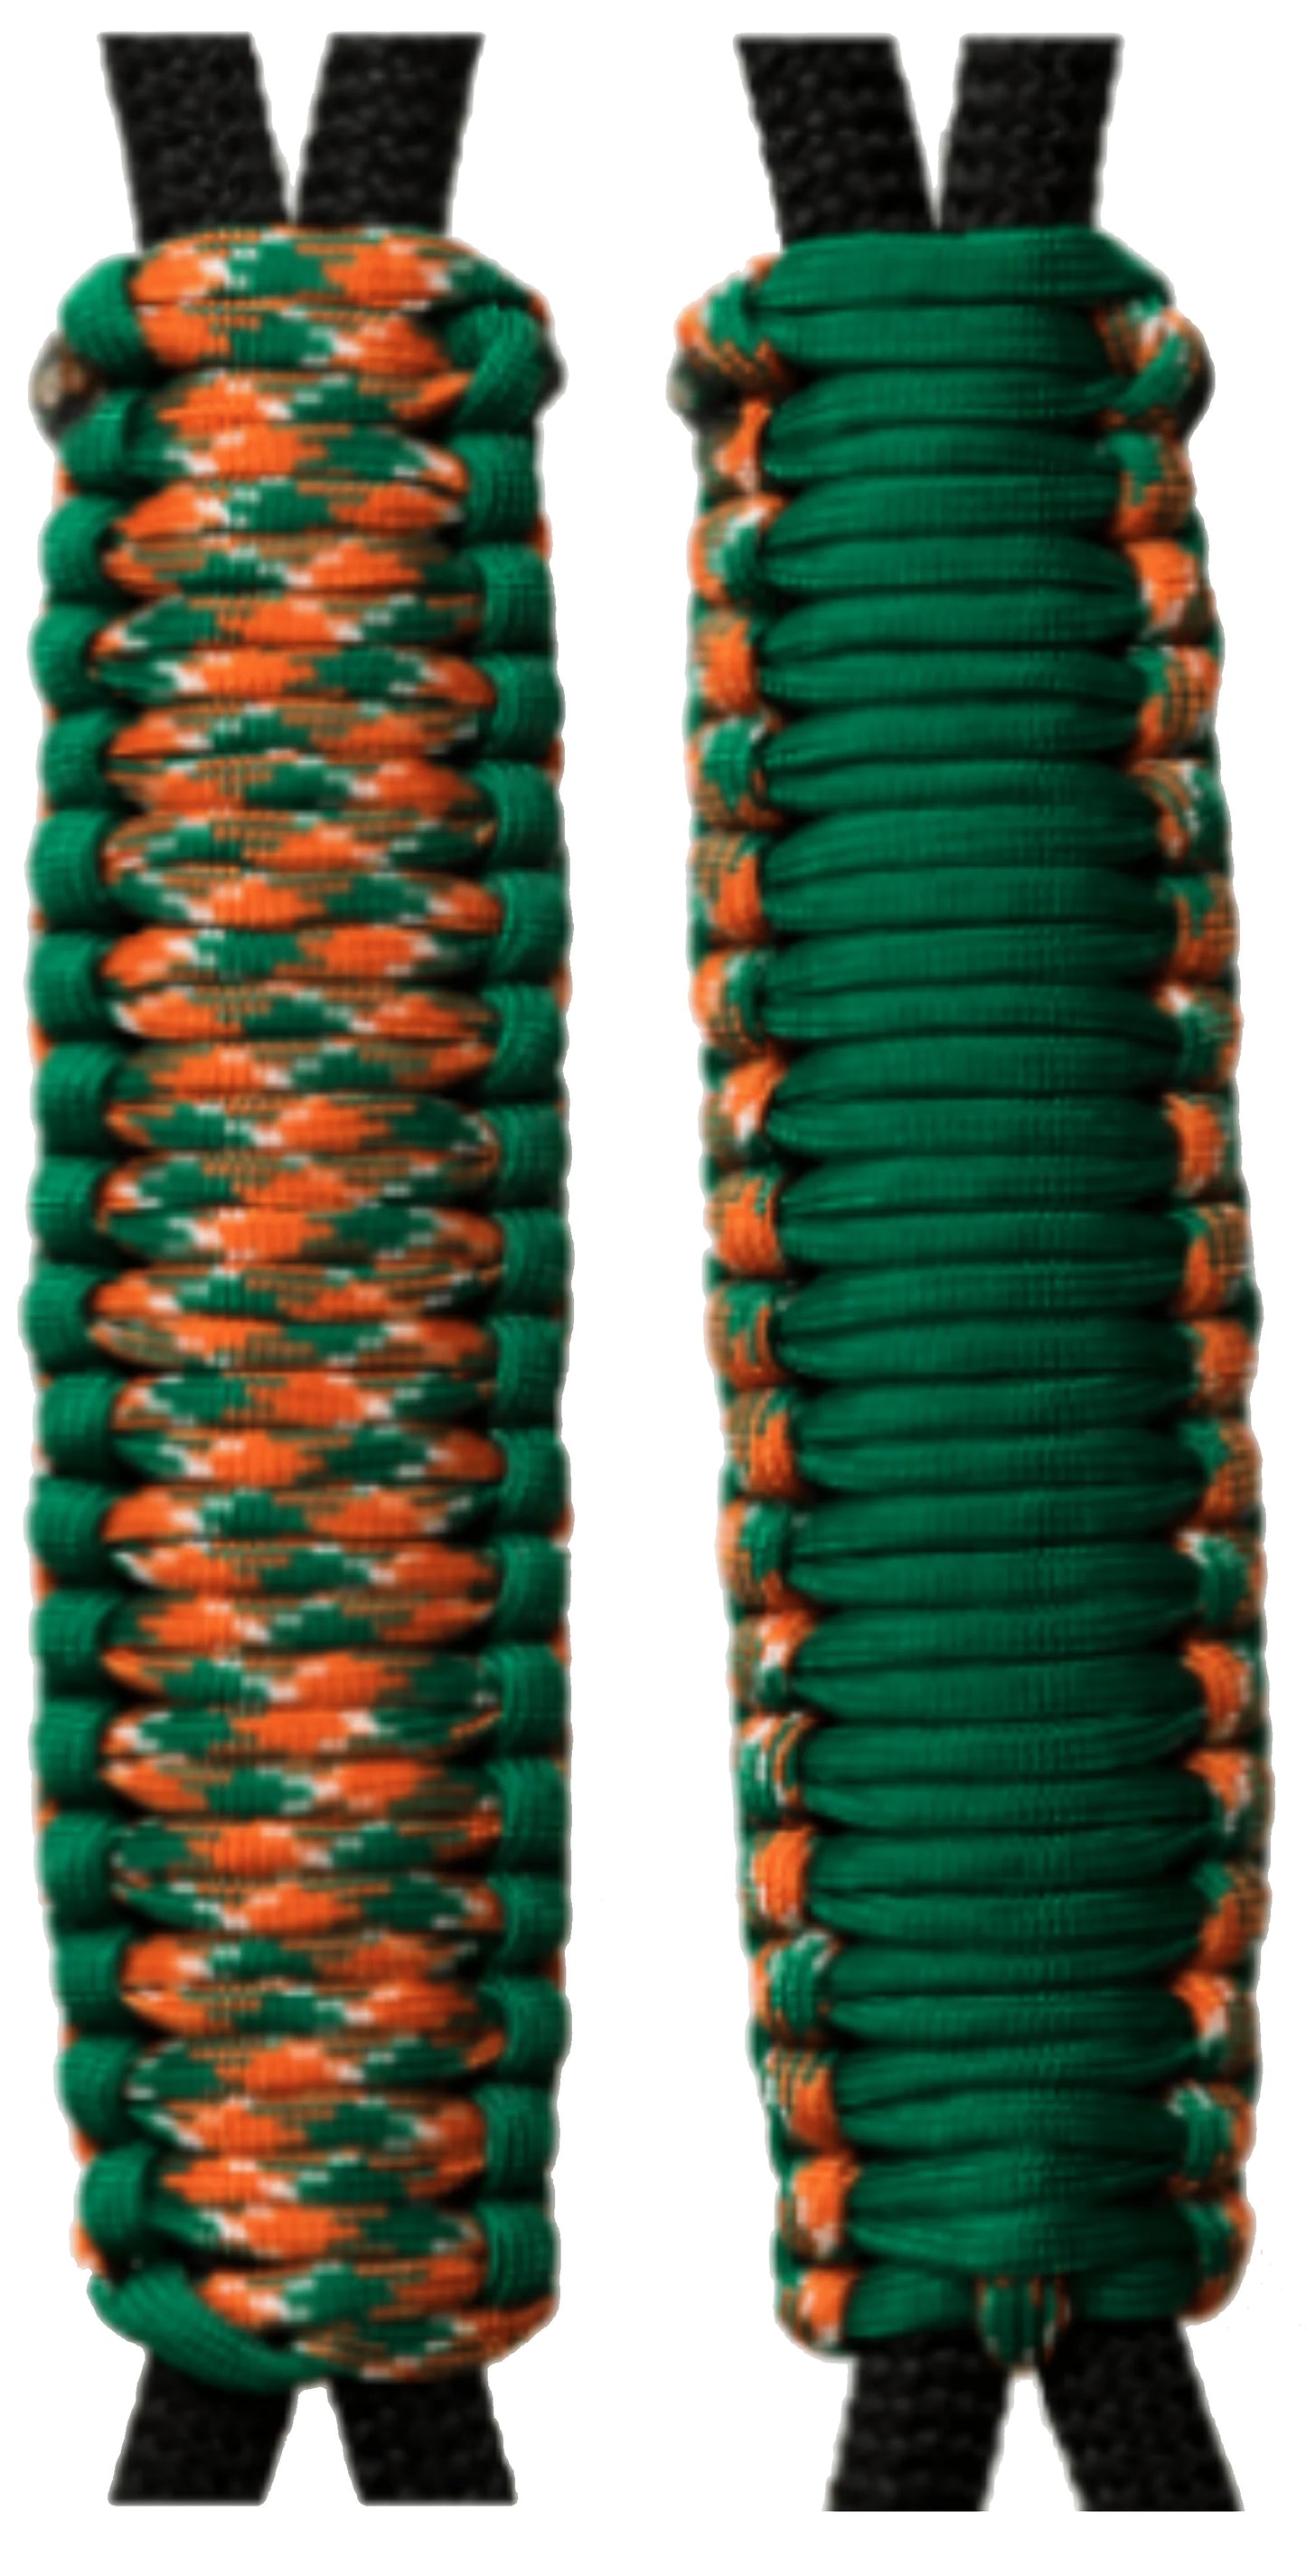 Kelly Green & Celtic C019C064 - Paracord Handmade Handles for Stainless Steel Tumblers - Made in USA!